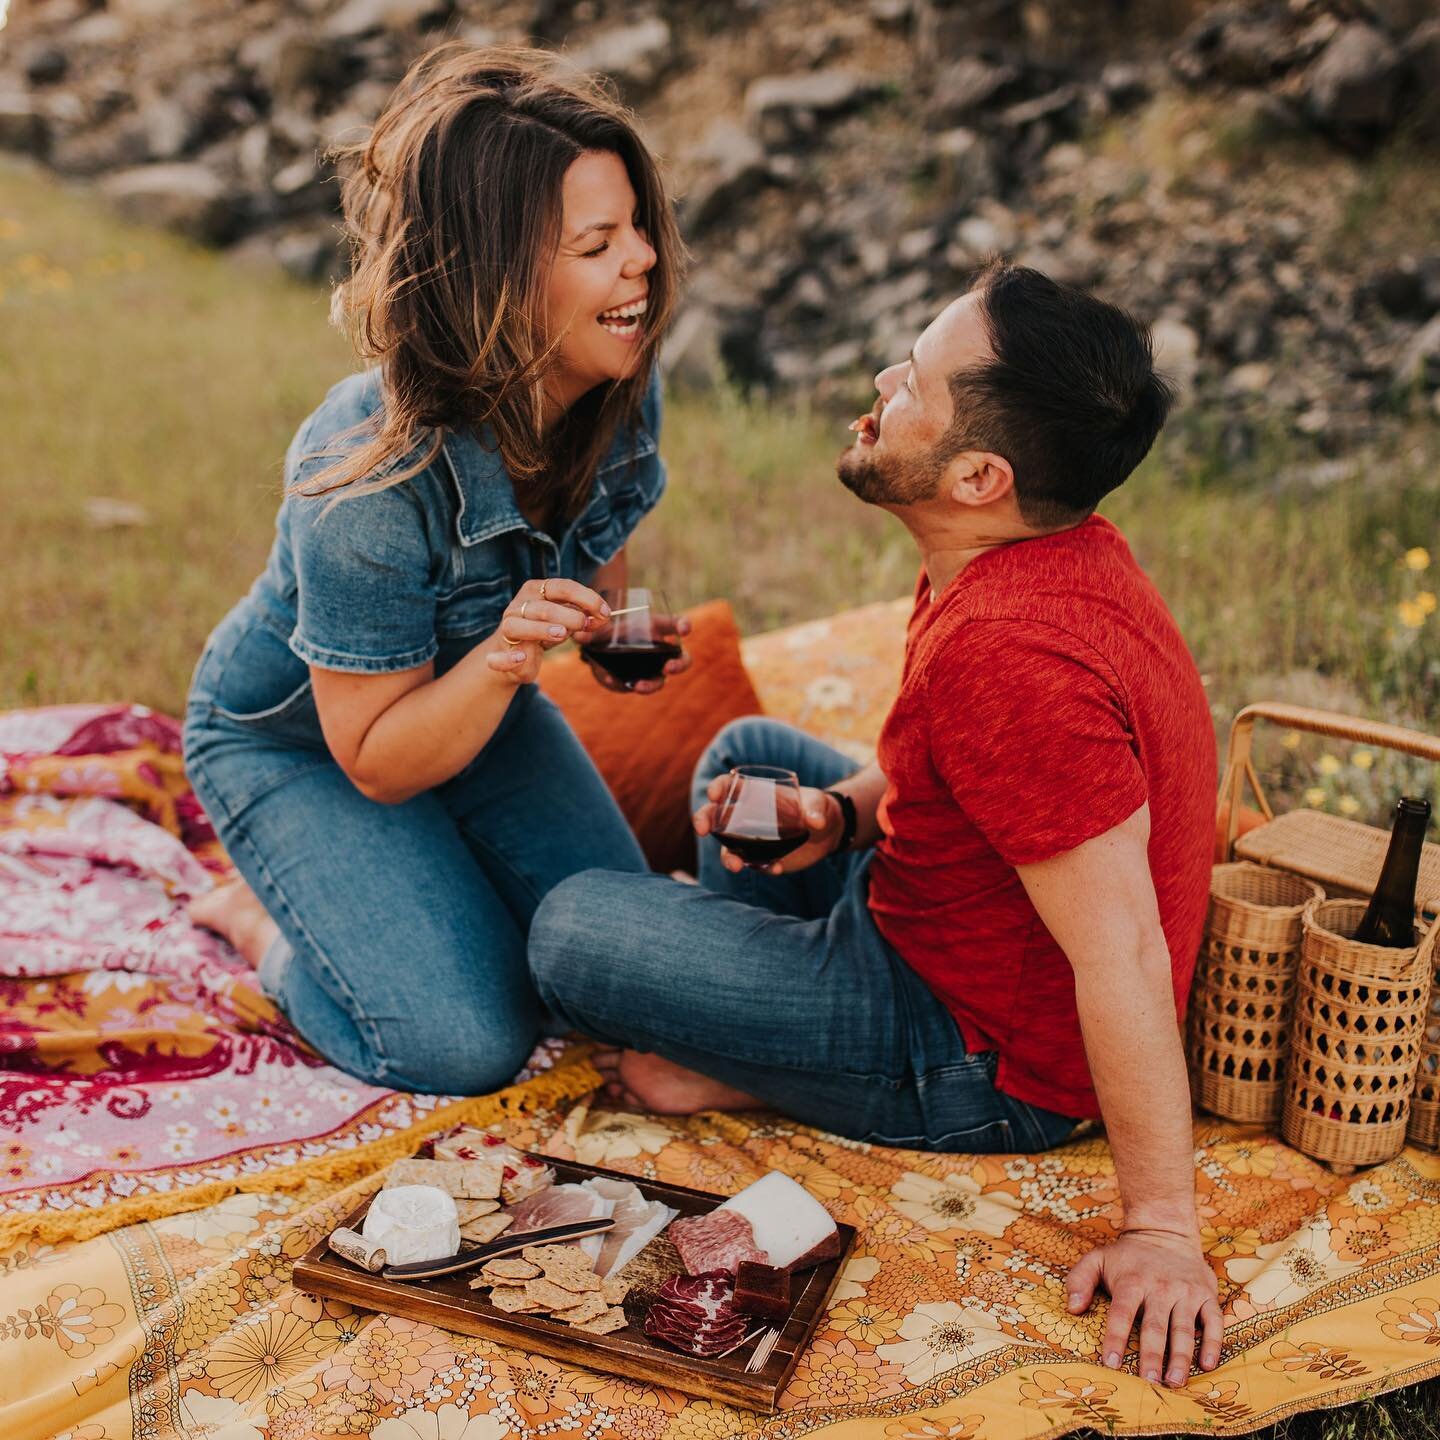 Happy Wedding Day Jenna and Joel!!🥰 I cannot wait to celebrate your love over the next two days! ❤️ How adorable is this little picnic session we had in the Columbia River Gorge?! 😍